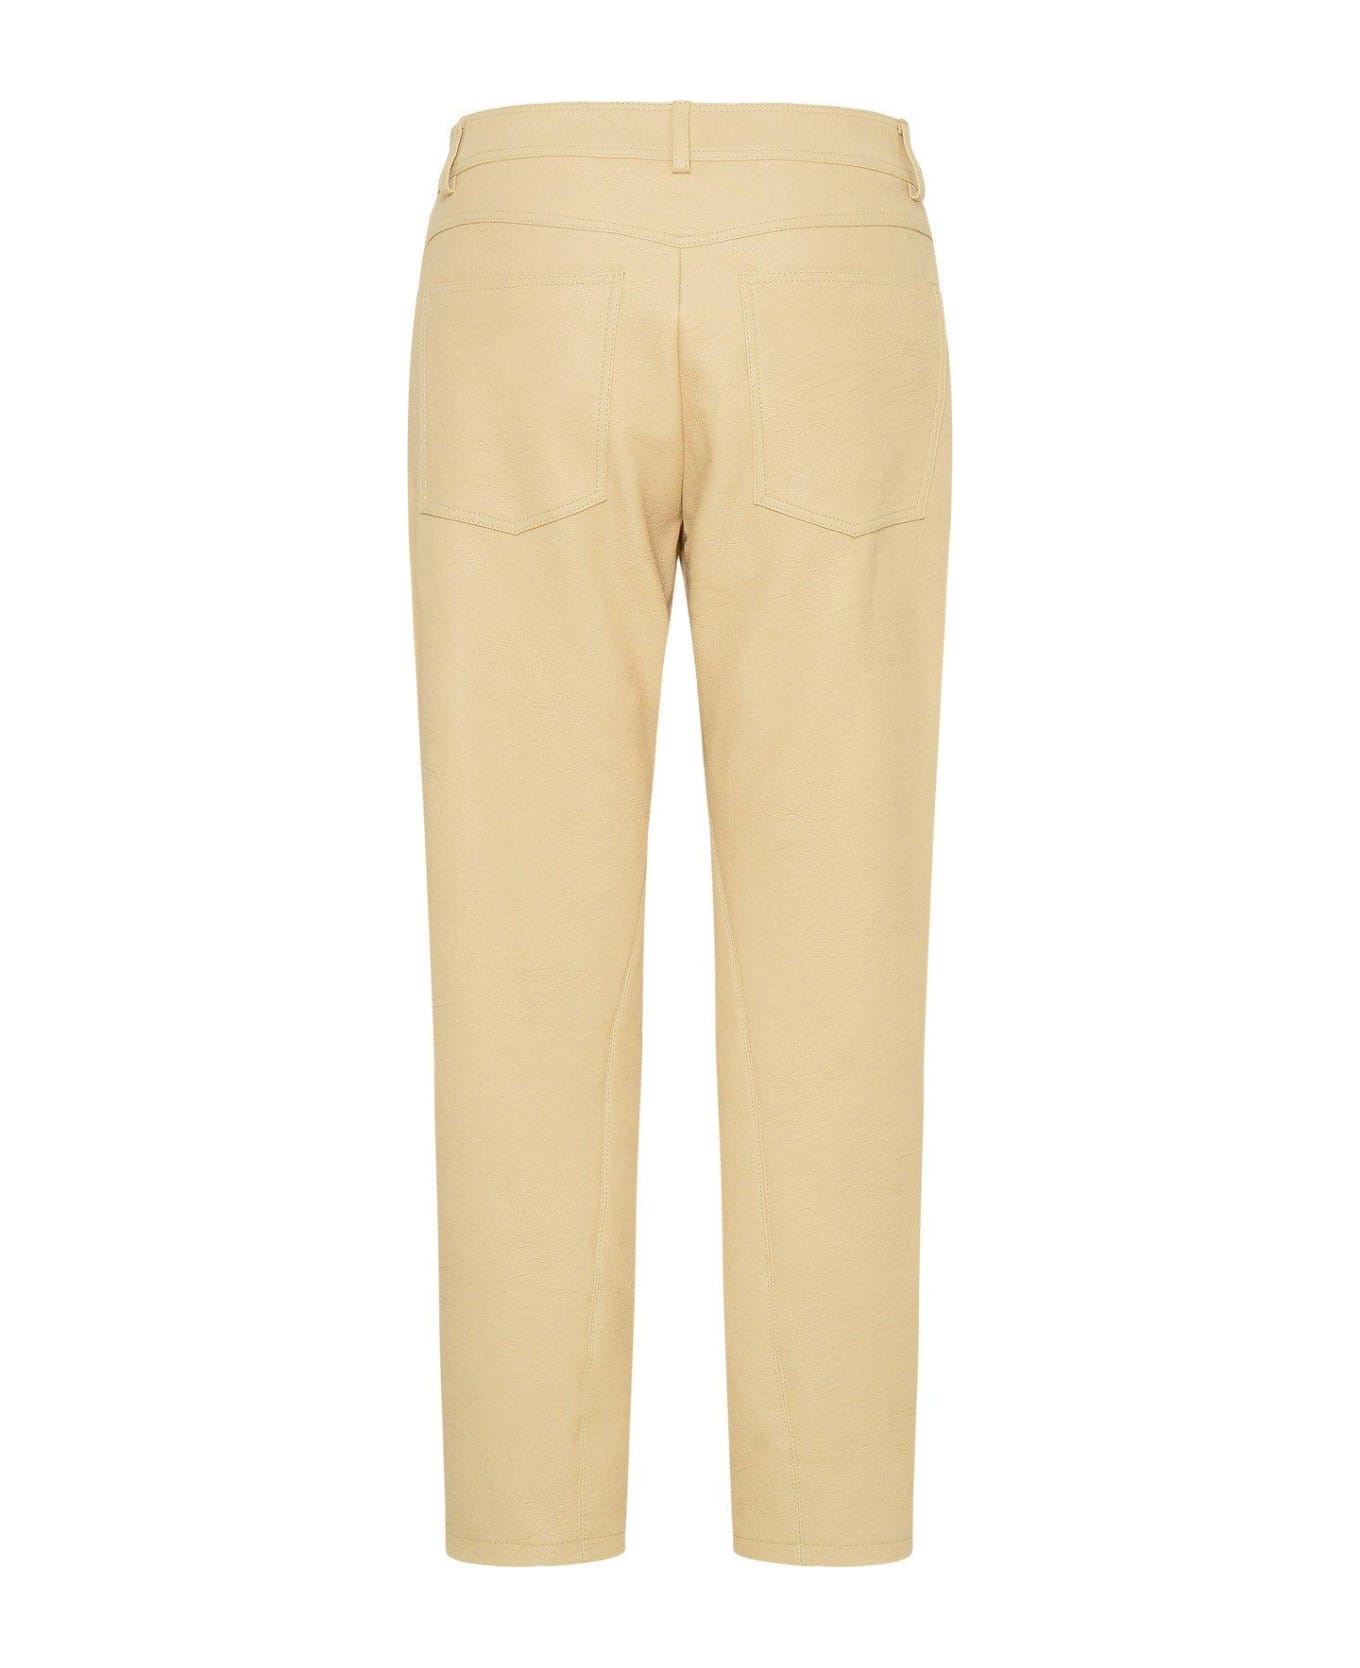 Stella McCartney Contrast Stitched Cropped Trousers - Beige